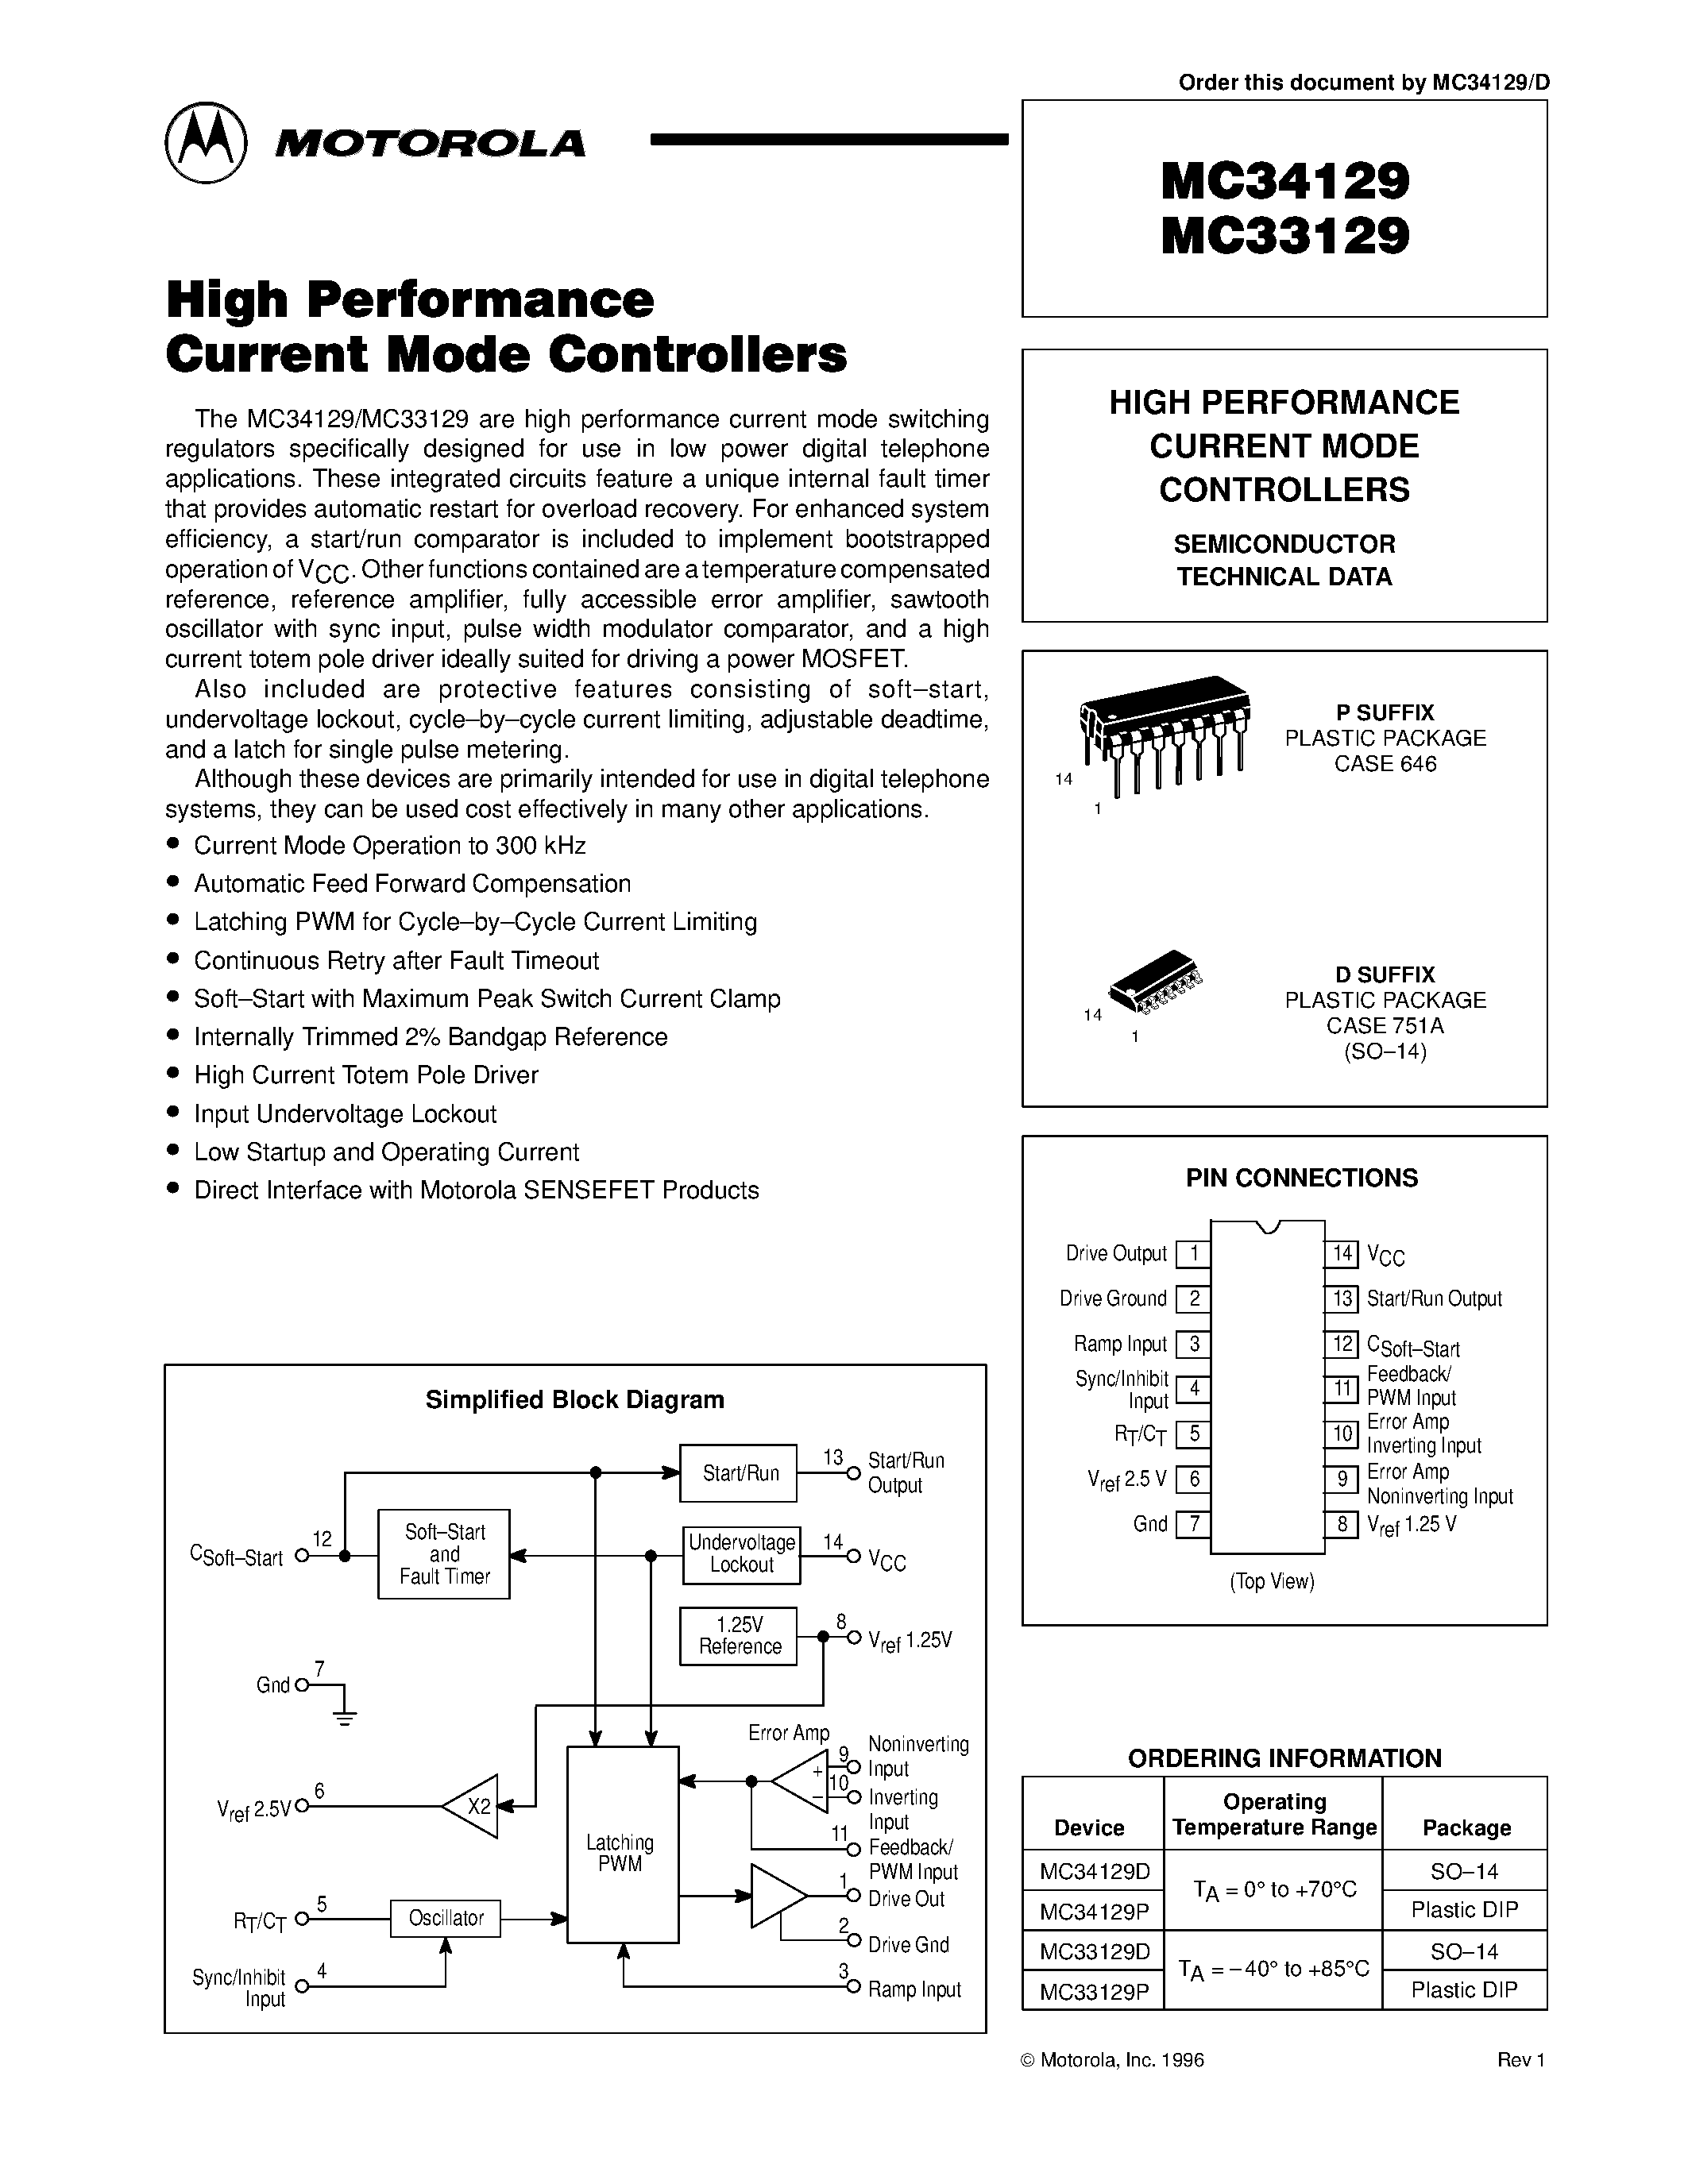 Datasheet MC33129 - HIGH PERFORMANCE CURRENT MODE CONTROLLERS page 1